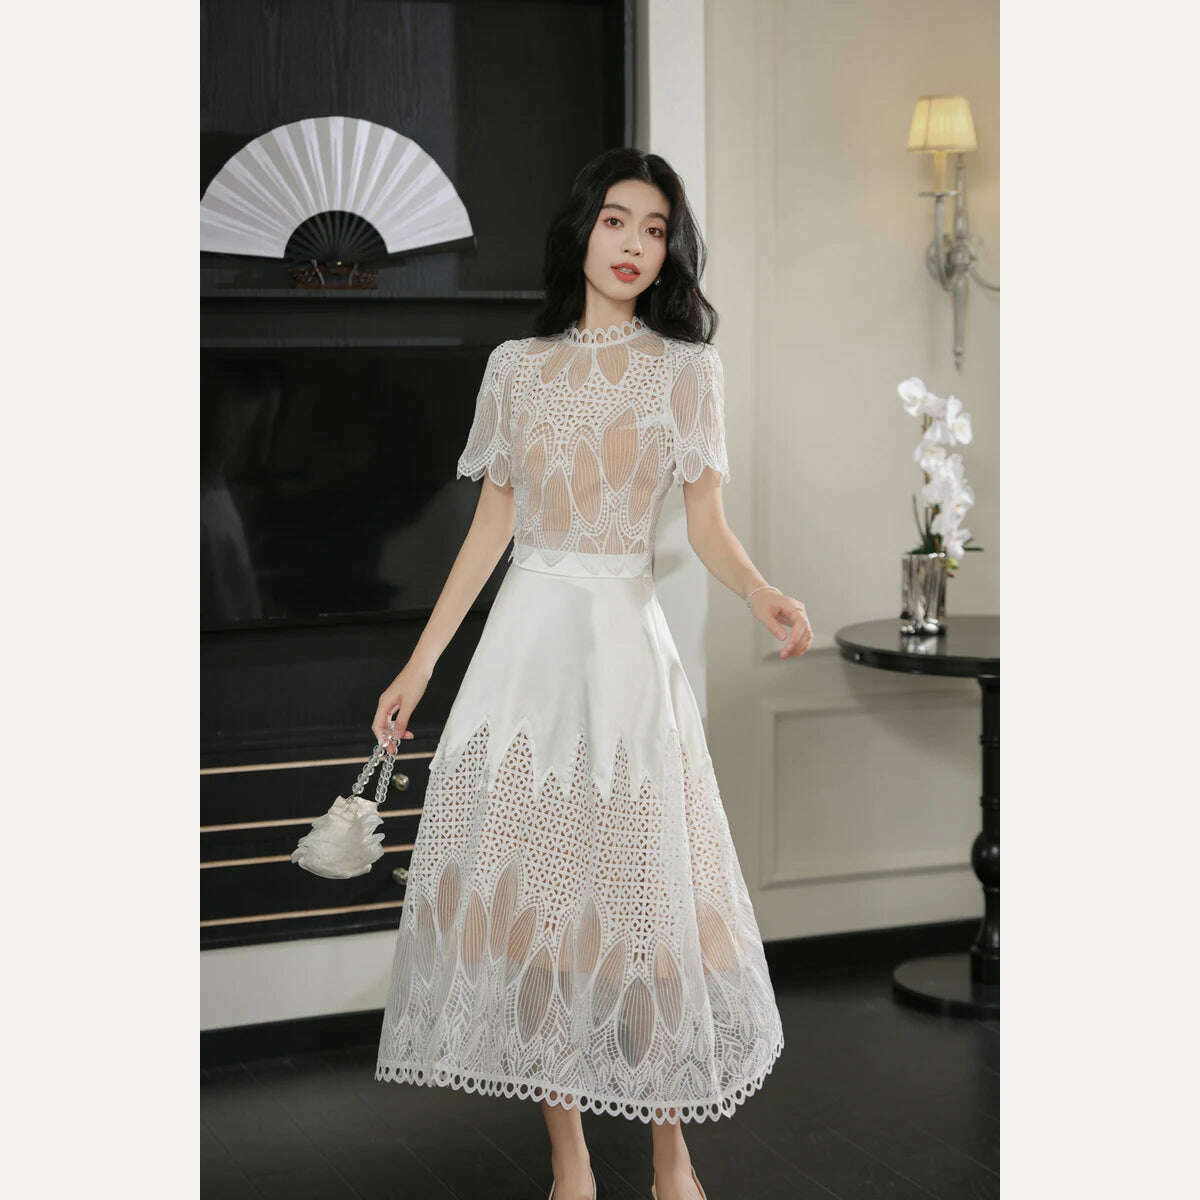 KIMLUD, High Quality Fashion Vintage Design Puff Sleeve Women Summer New Lace Embroidery Patchwork Vestido Midi Party Dress, KIMLUD Women's Clothes